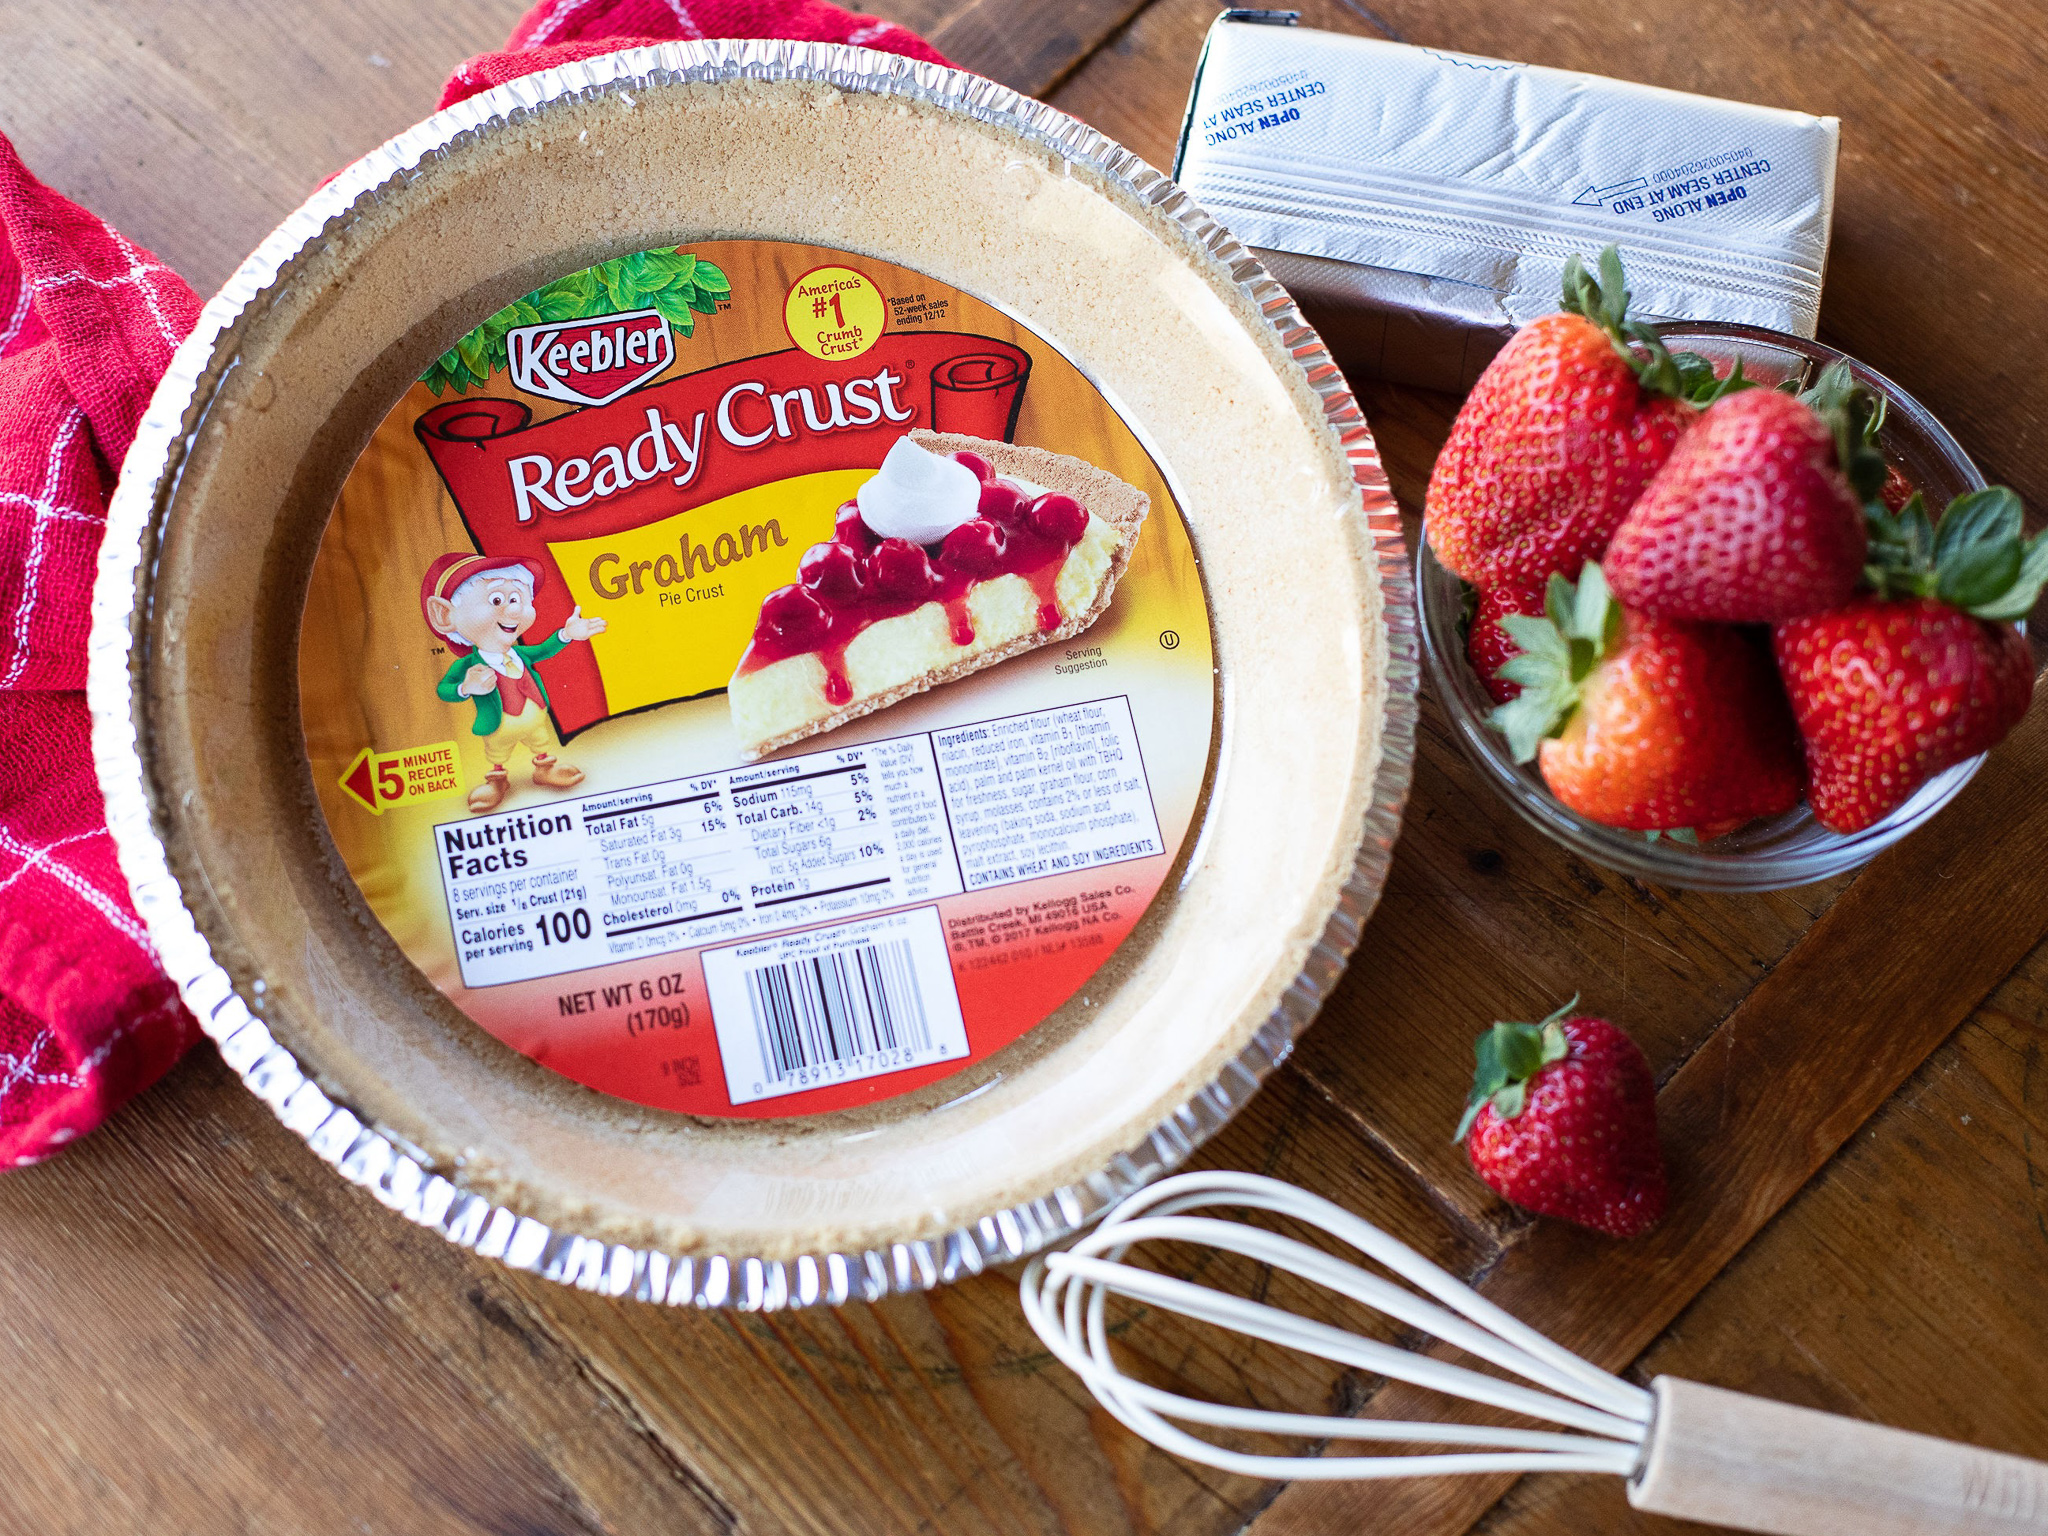 Get Keebler Ready Crust For As Low As $1.33 At Publix